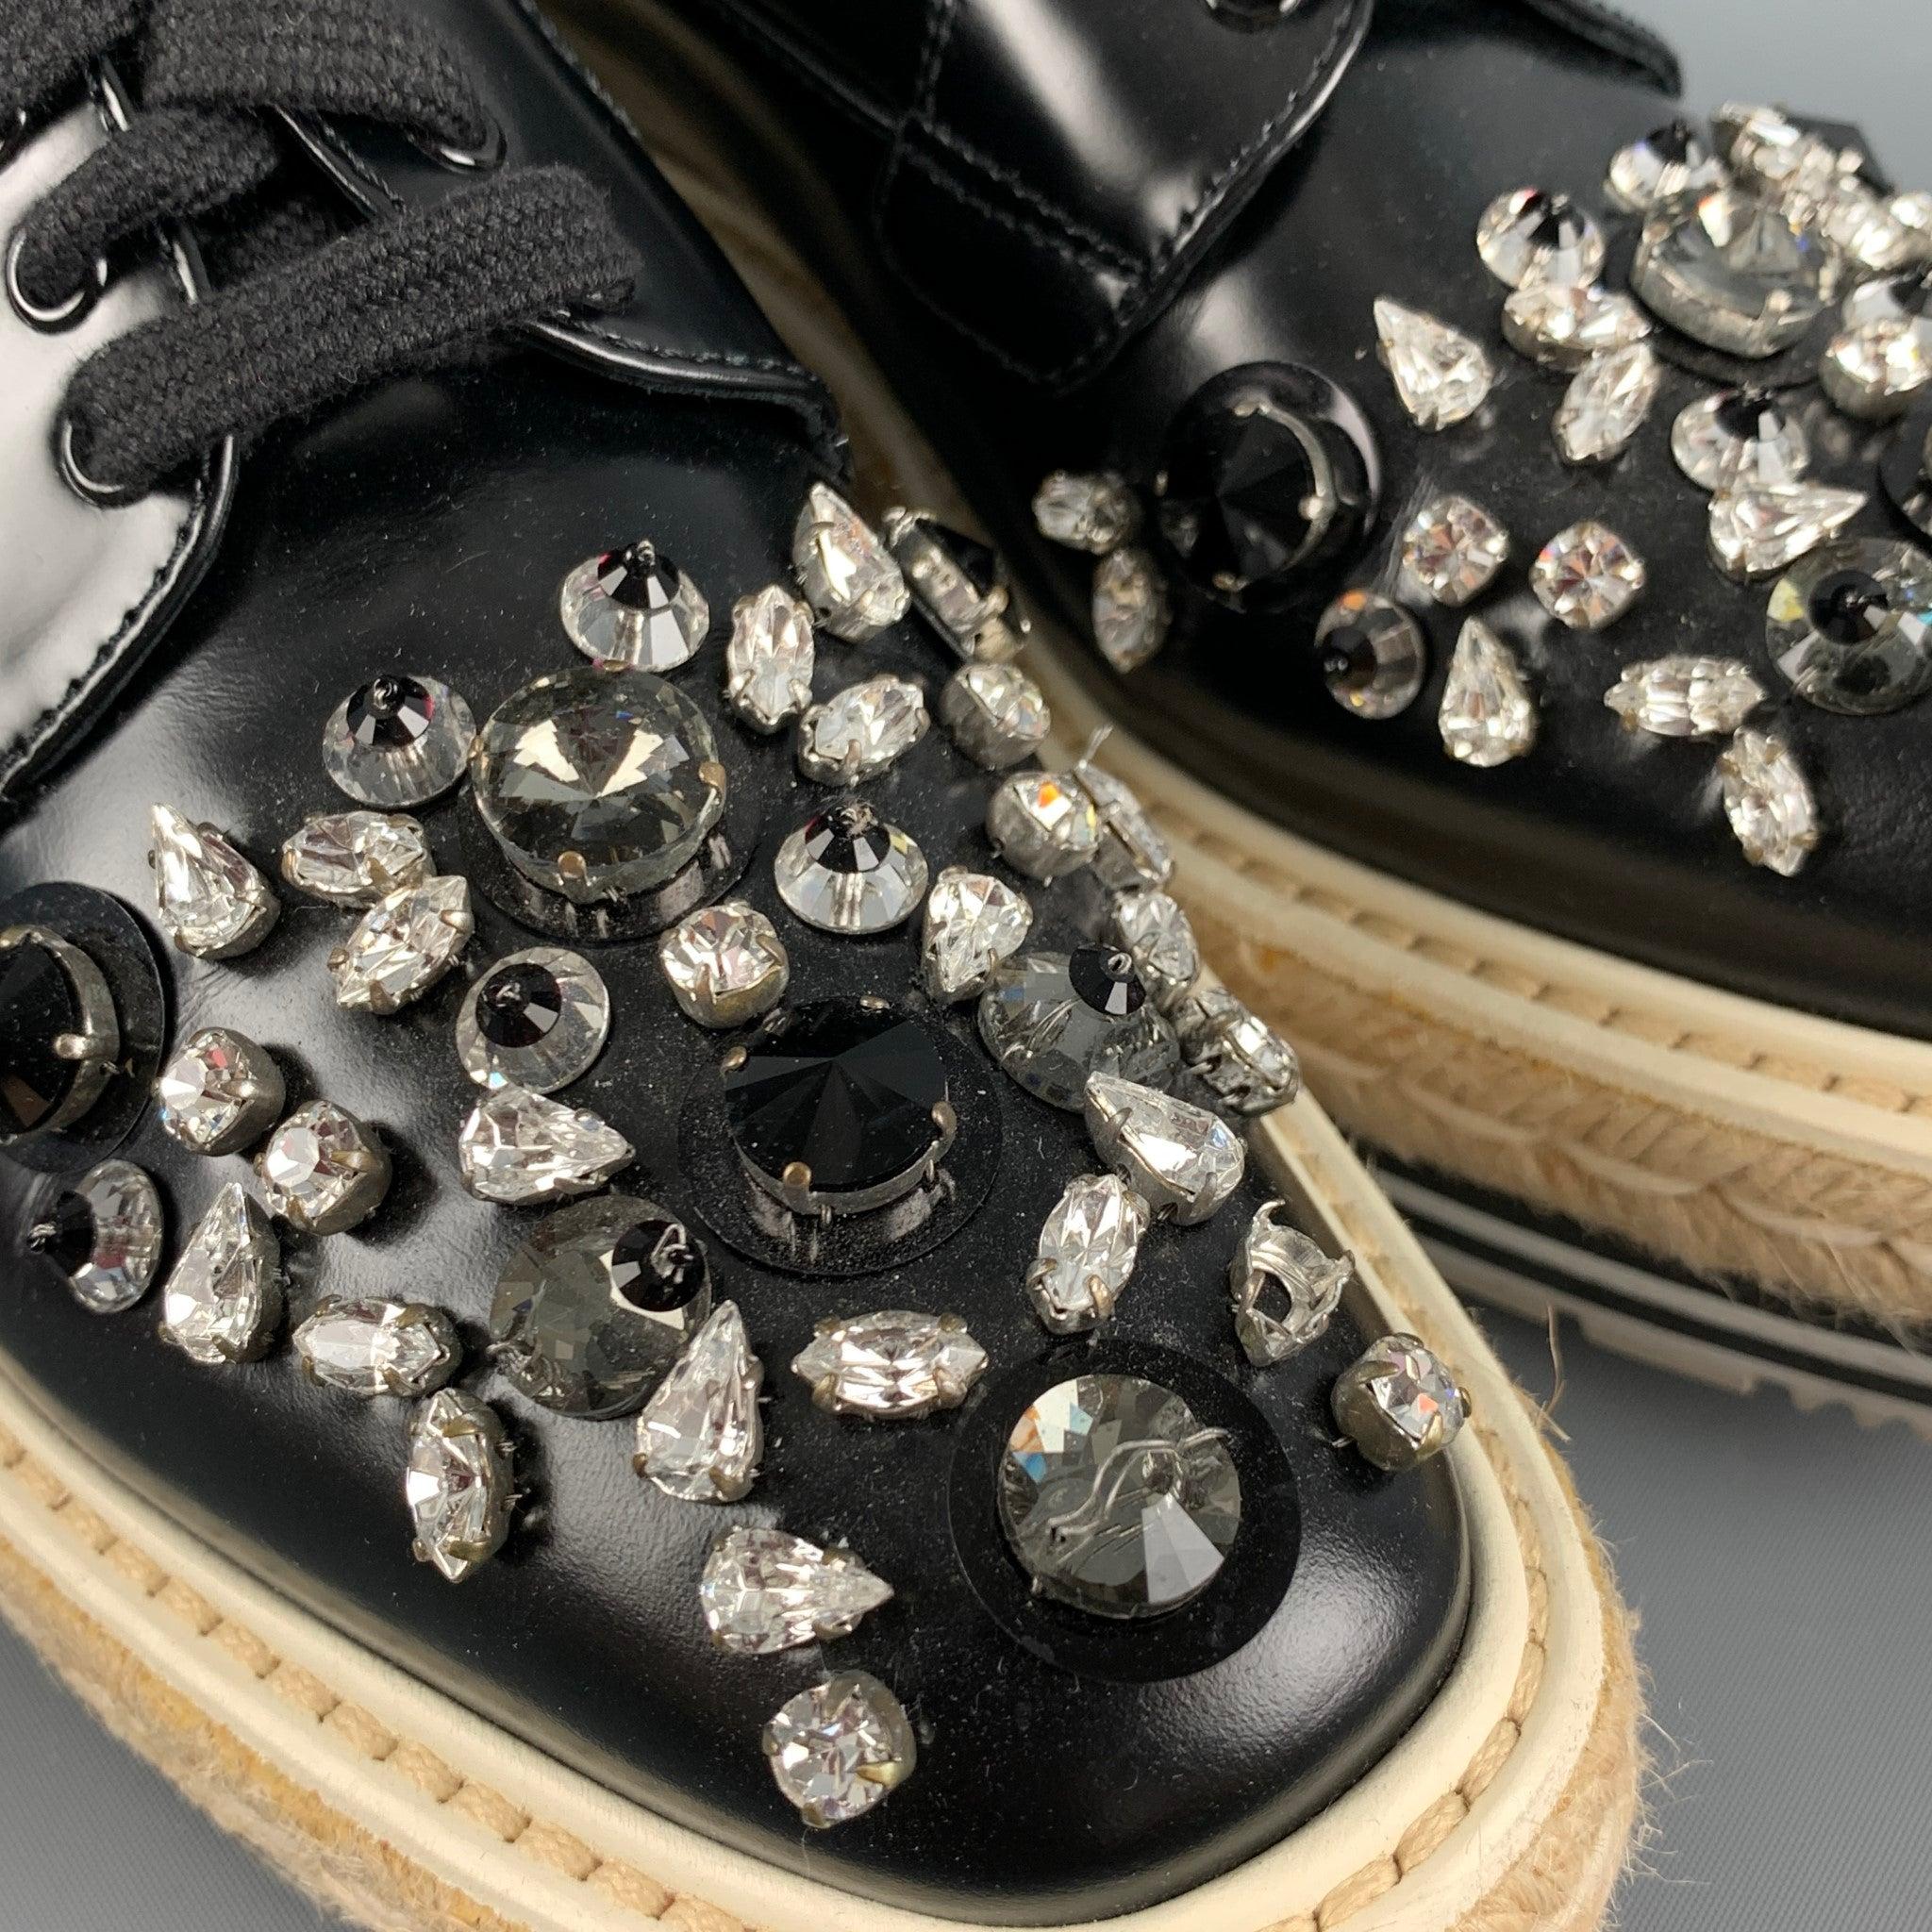 PRADA Size 7.5 Black Leather Applique Platform Laces In Good Condition For Sale In San Francisco, CA